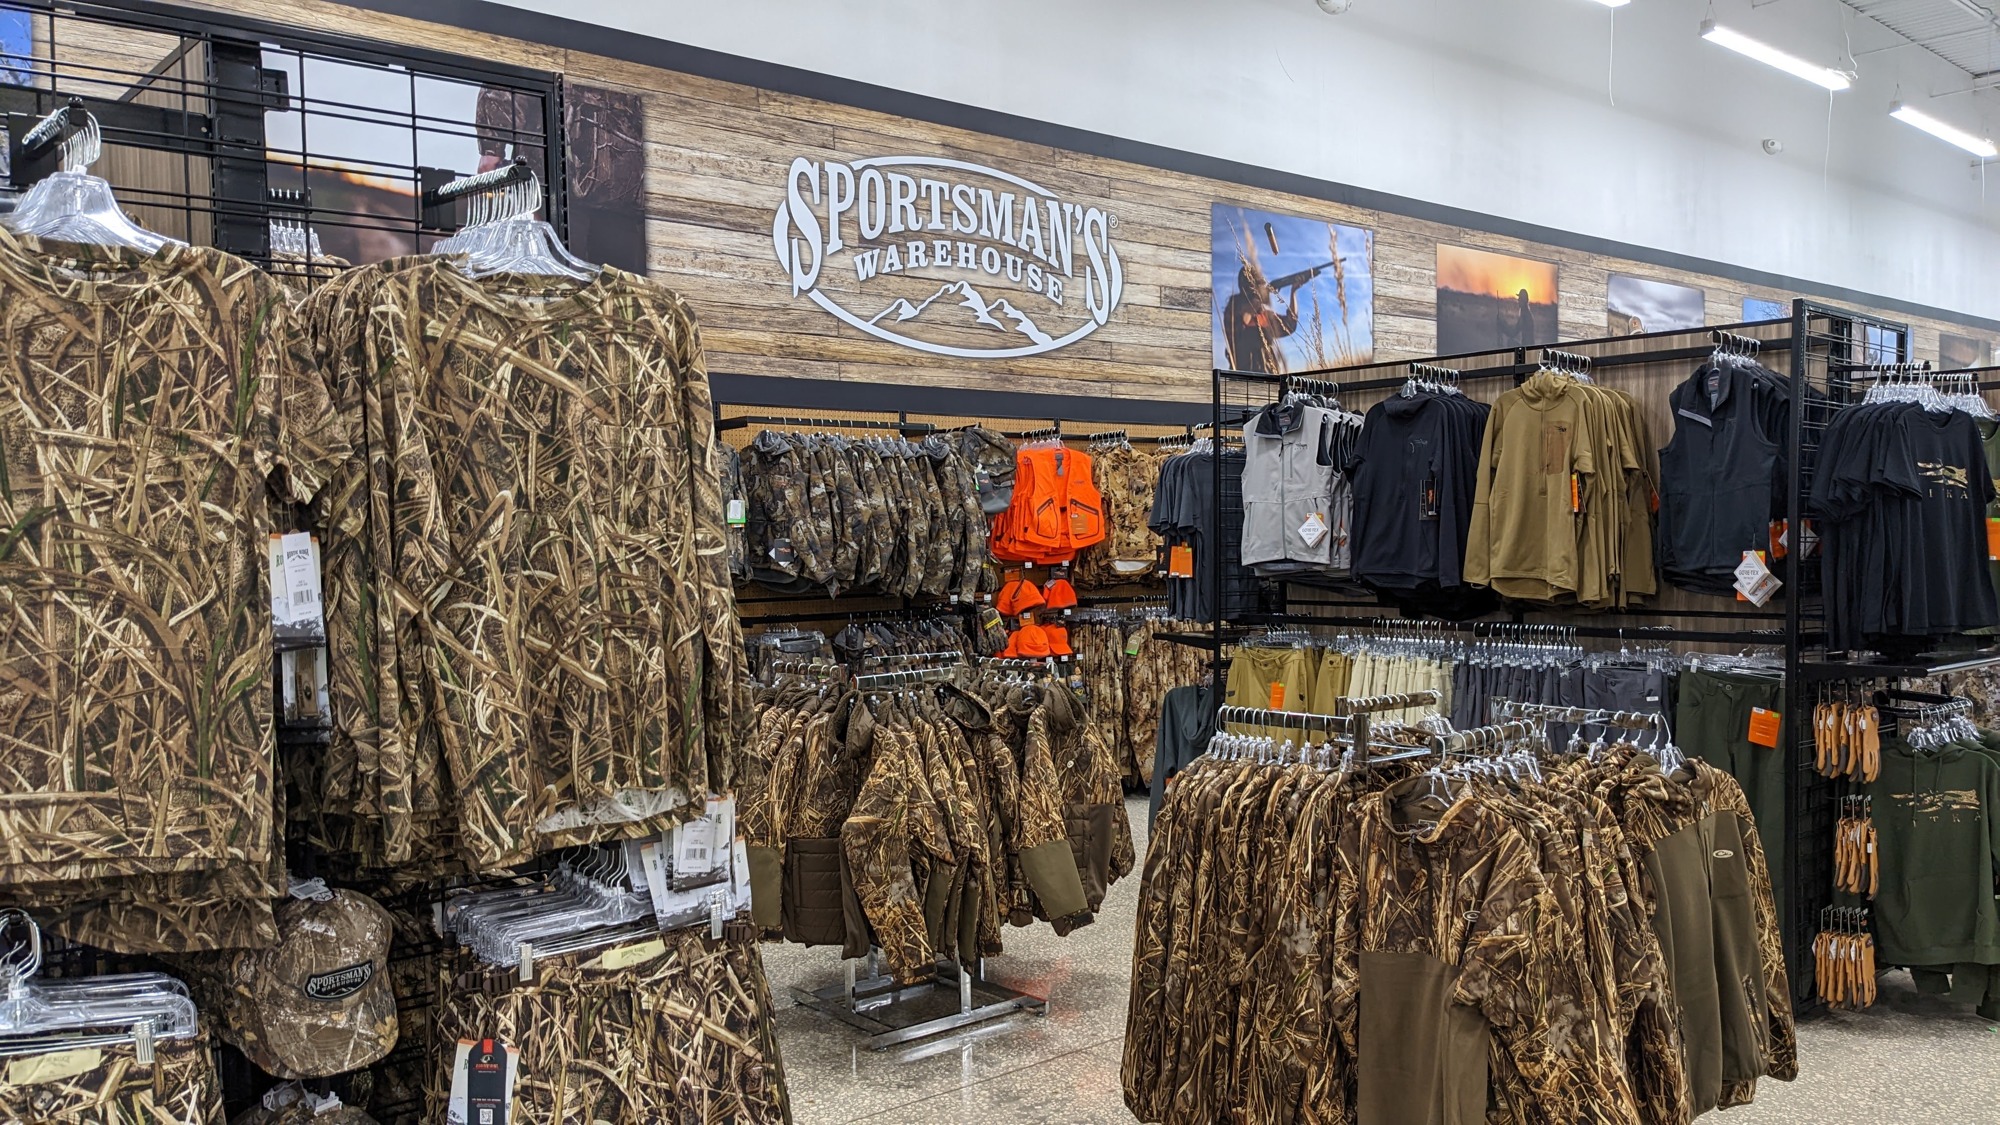 Hunting apparel on display at Sportsman’s Warehouse.